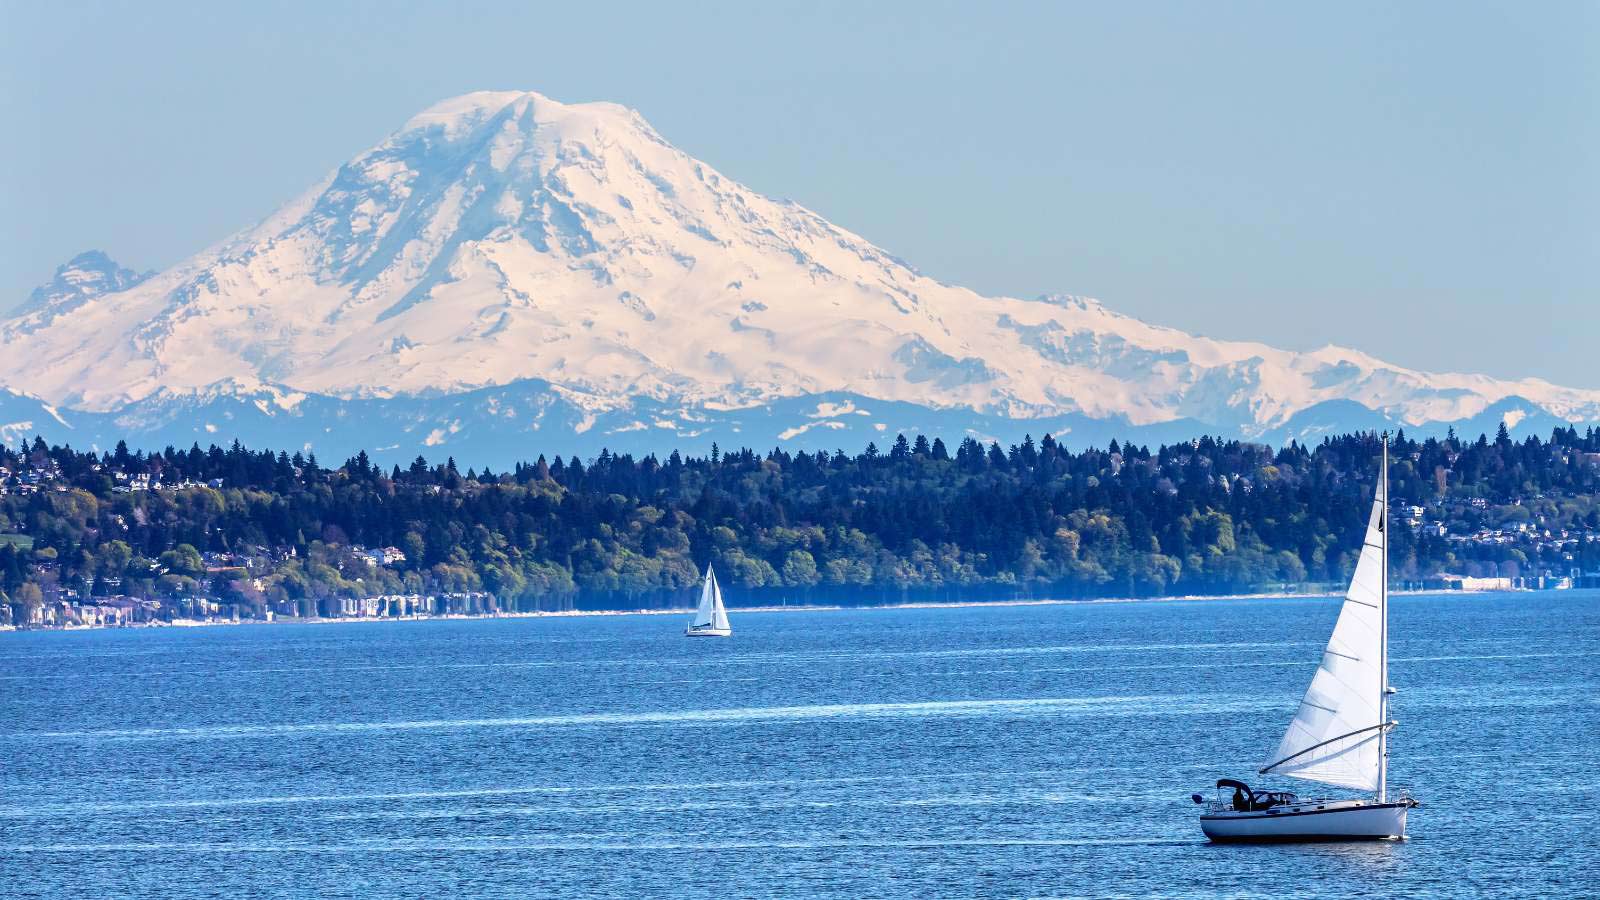 <p>The Puget Sound is a beautiful and diverse area, not just limited to Orca Island or Seattle. This area is mostly cold and rainy, but it’s also home to many different types of marine life and is a popular spot for boating and fishing.</p>